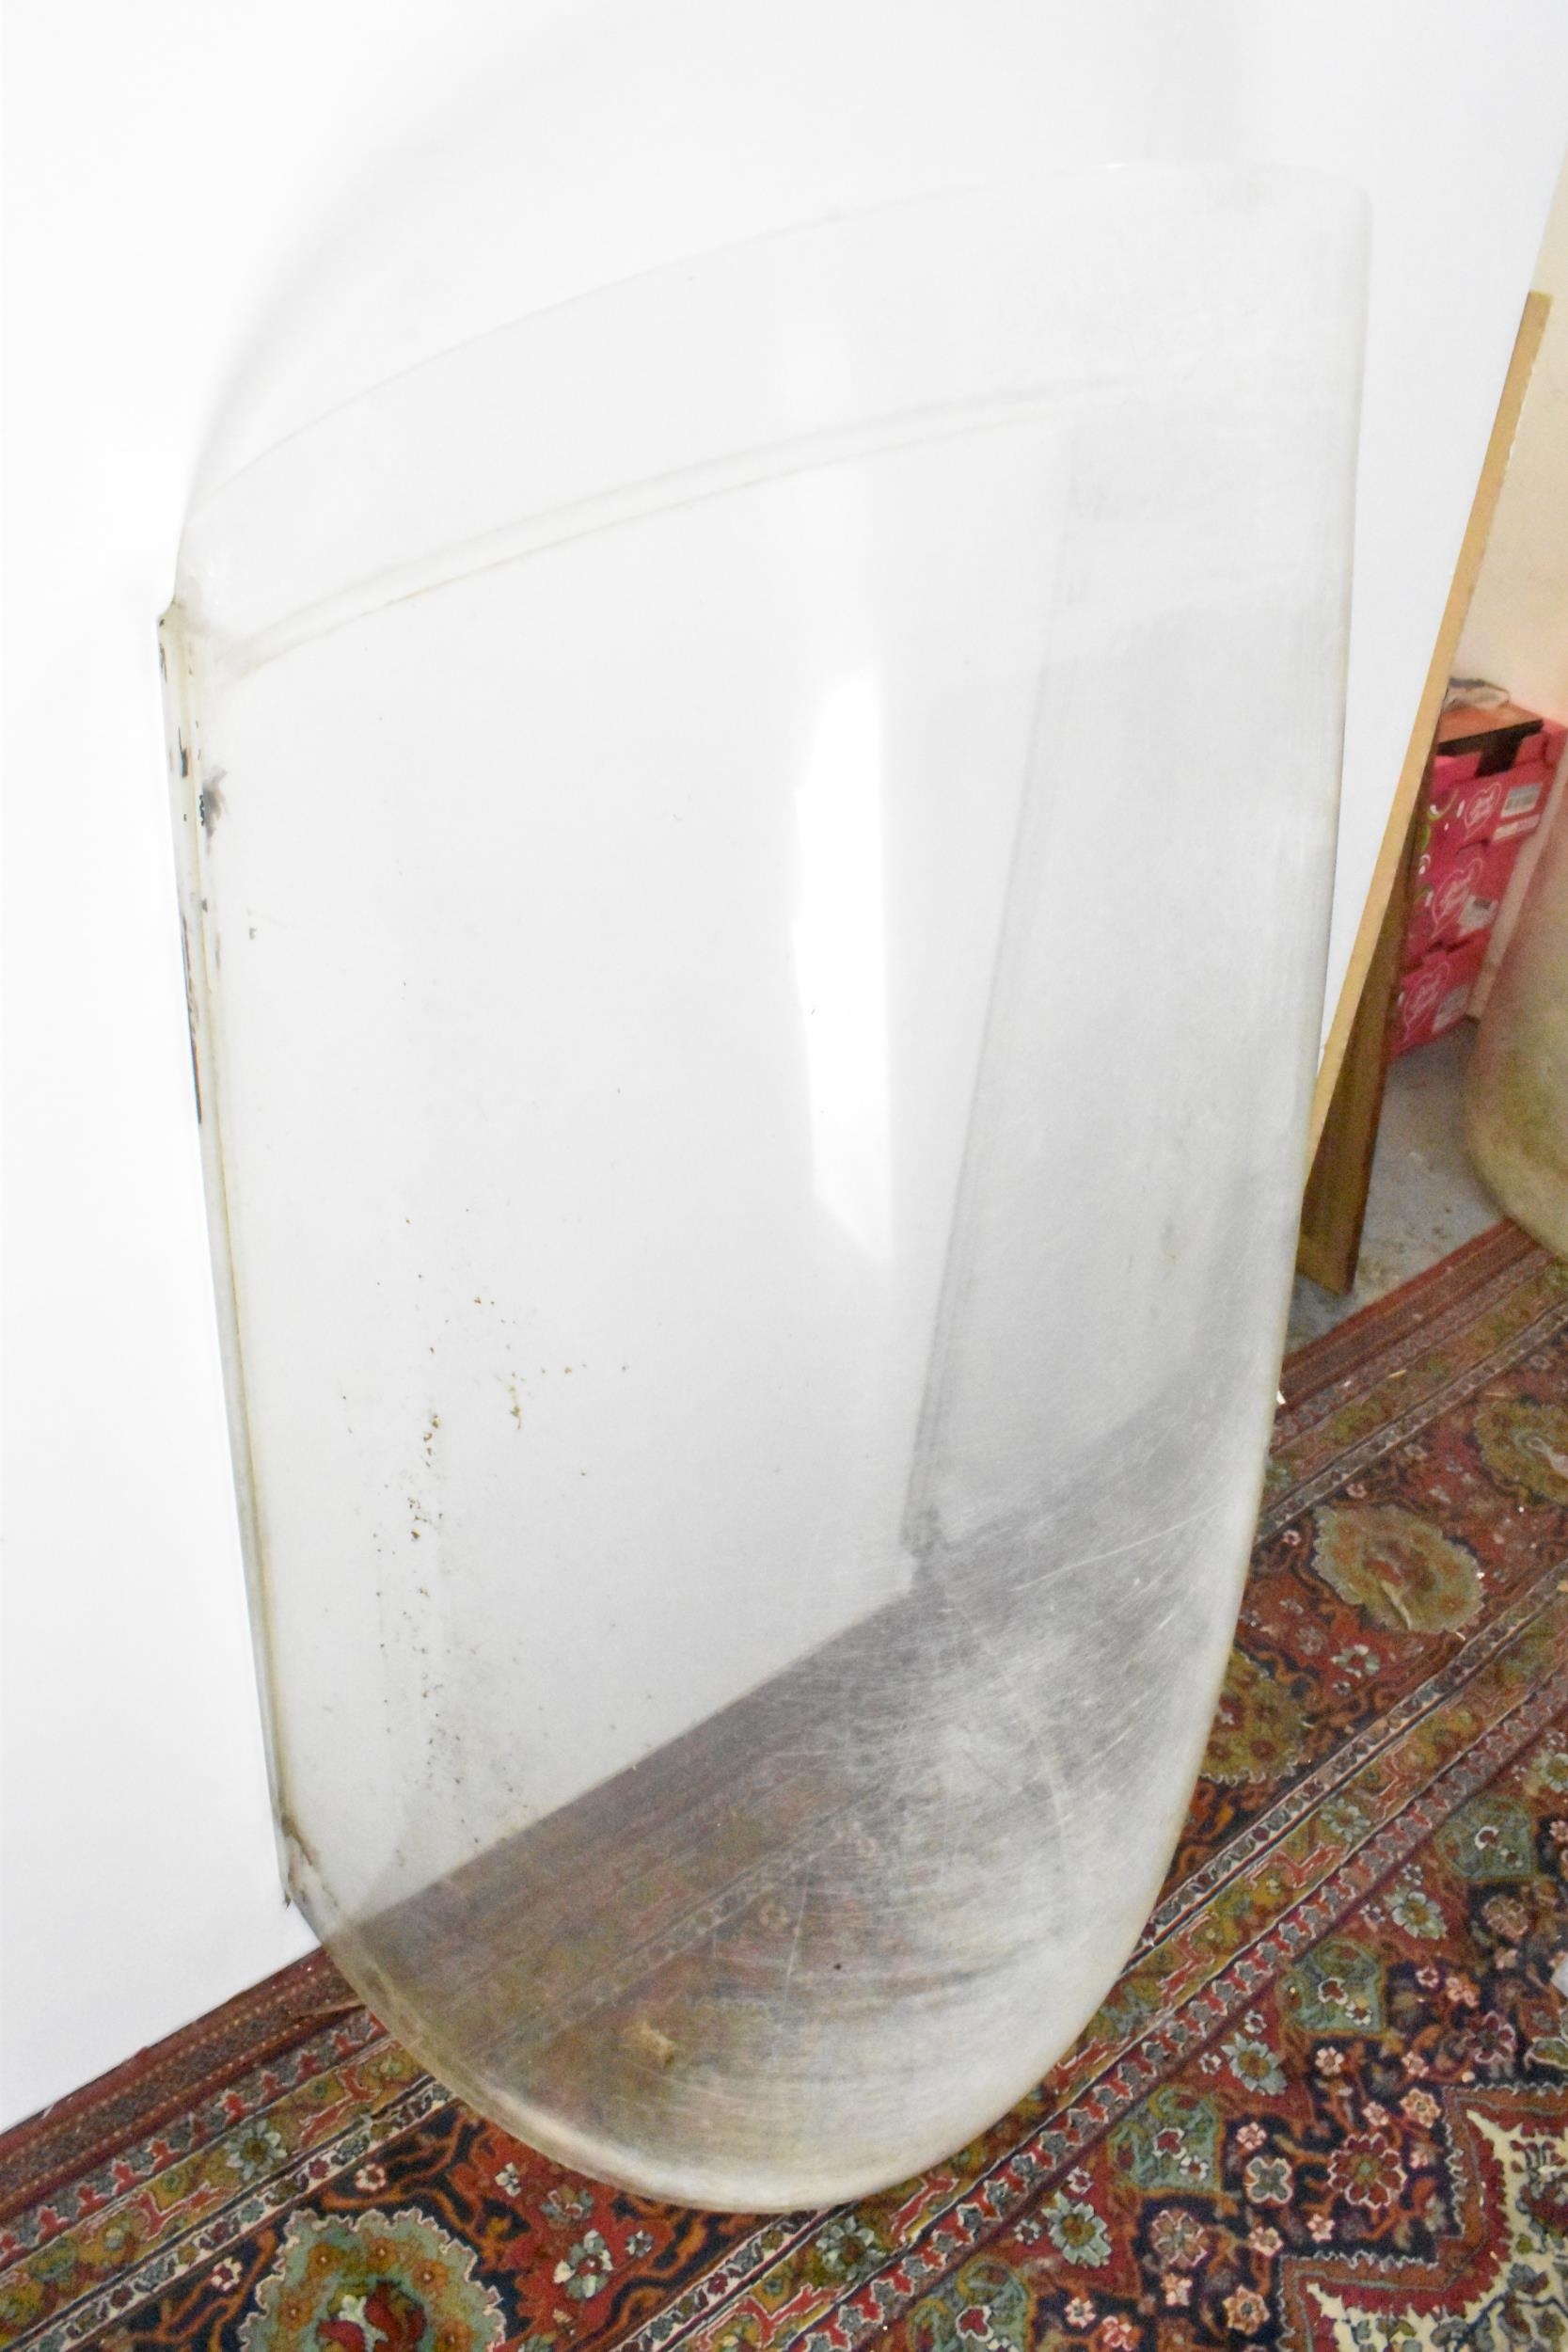 A 1930/40s perspex acrylic plane canopy/windshield, reputedly from a Hurricane, 139cm high x 68cm - Image 3 of 3